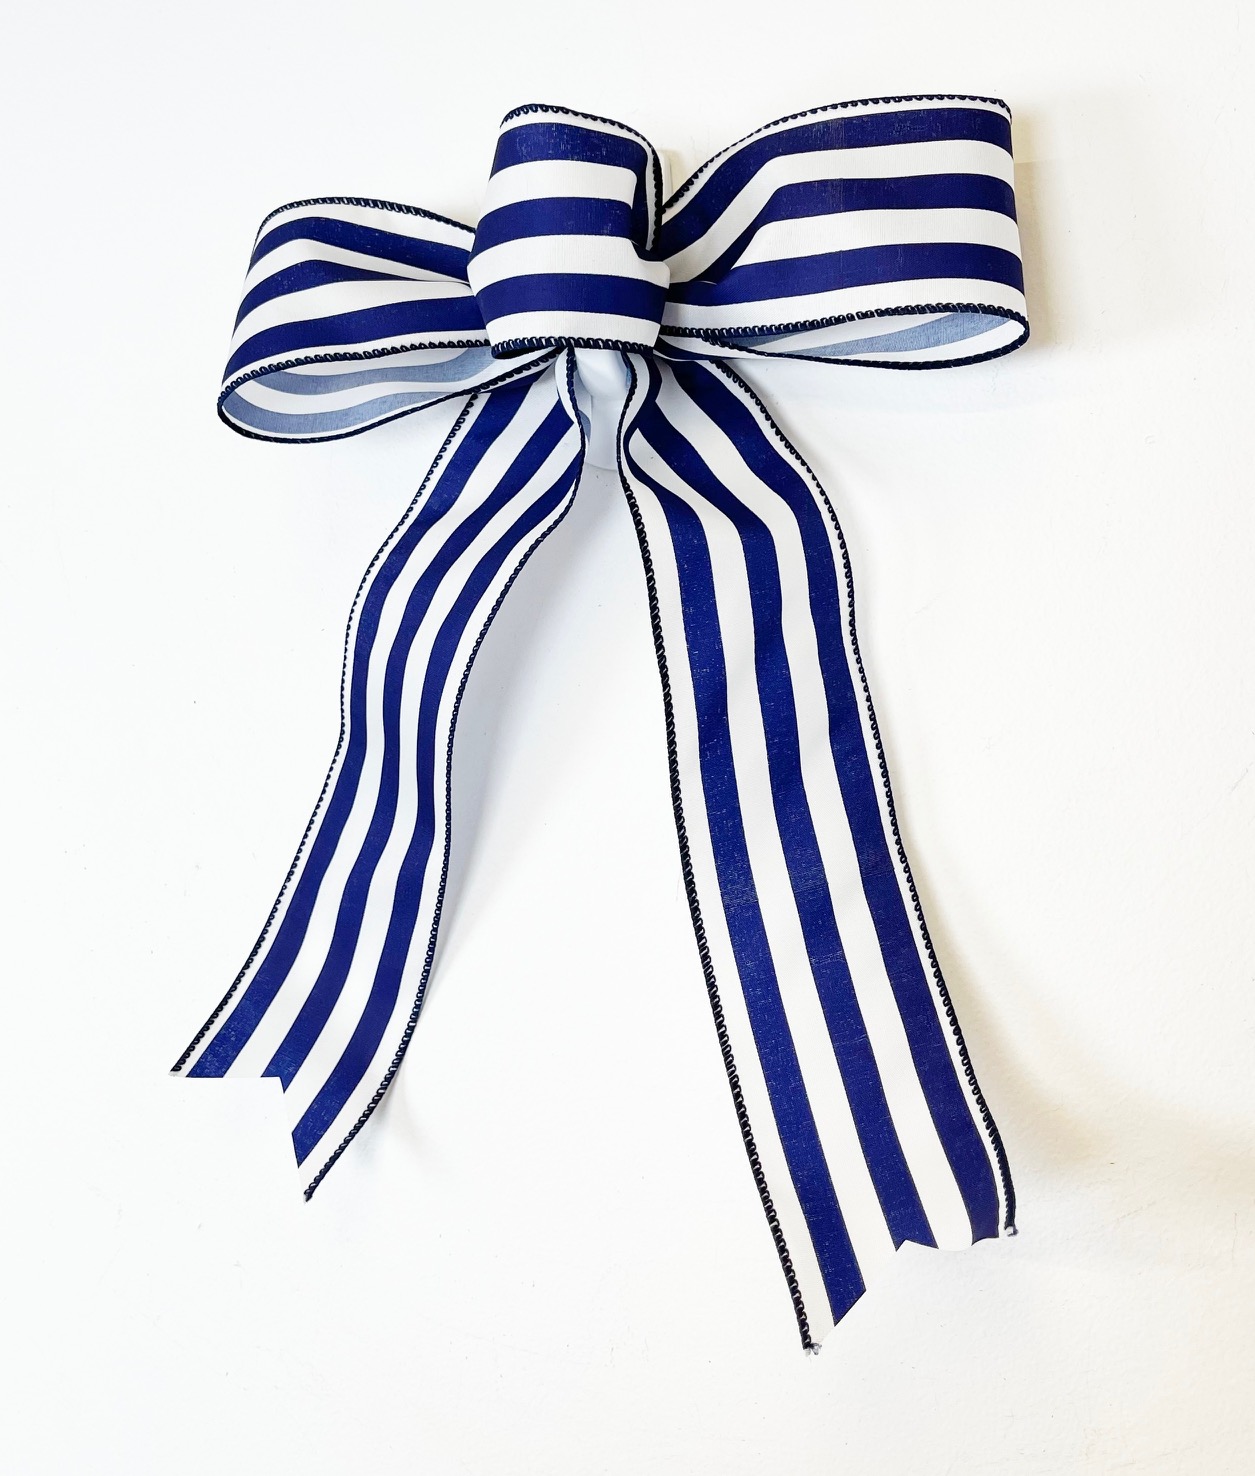 How to Make Satin or Silk Bows in the Bowdabra 